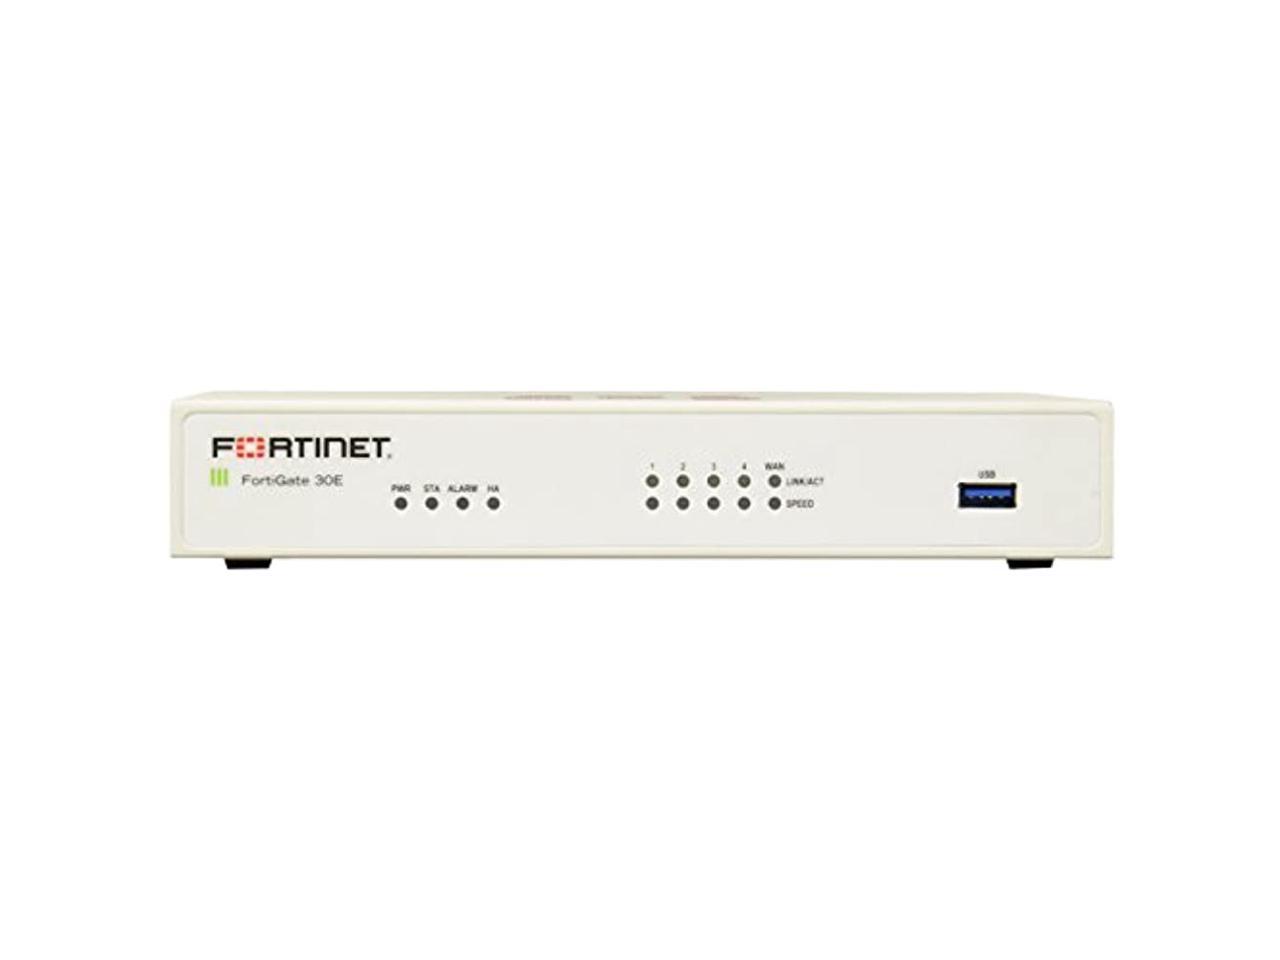 fortinet vpn client disconnects at 98